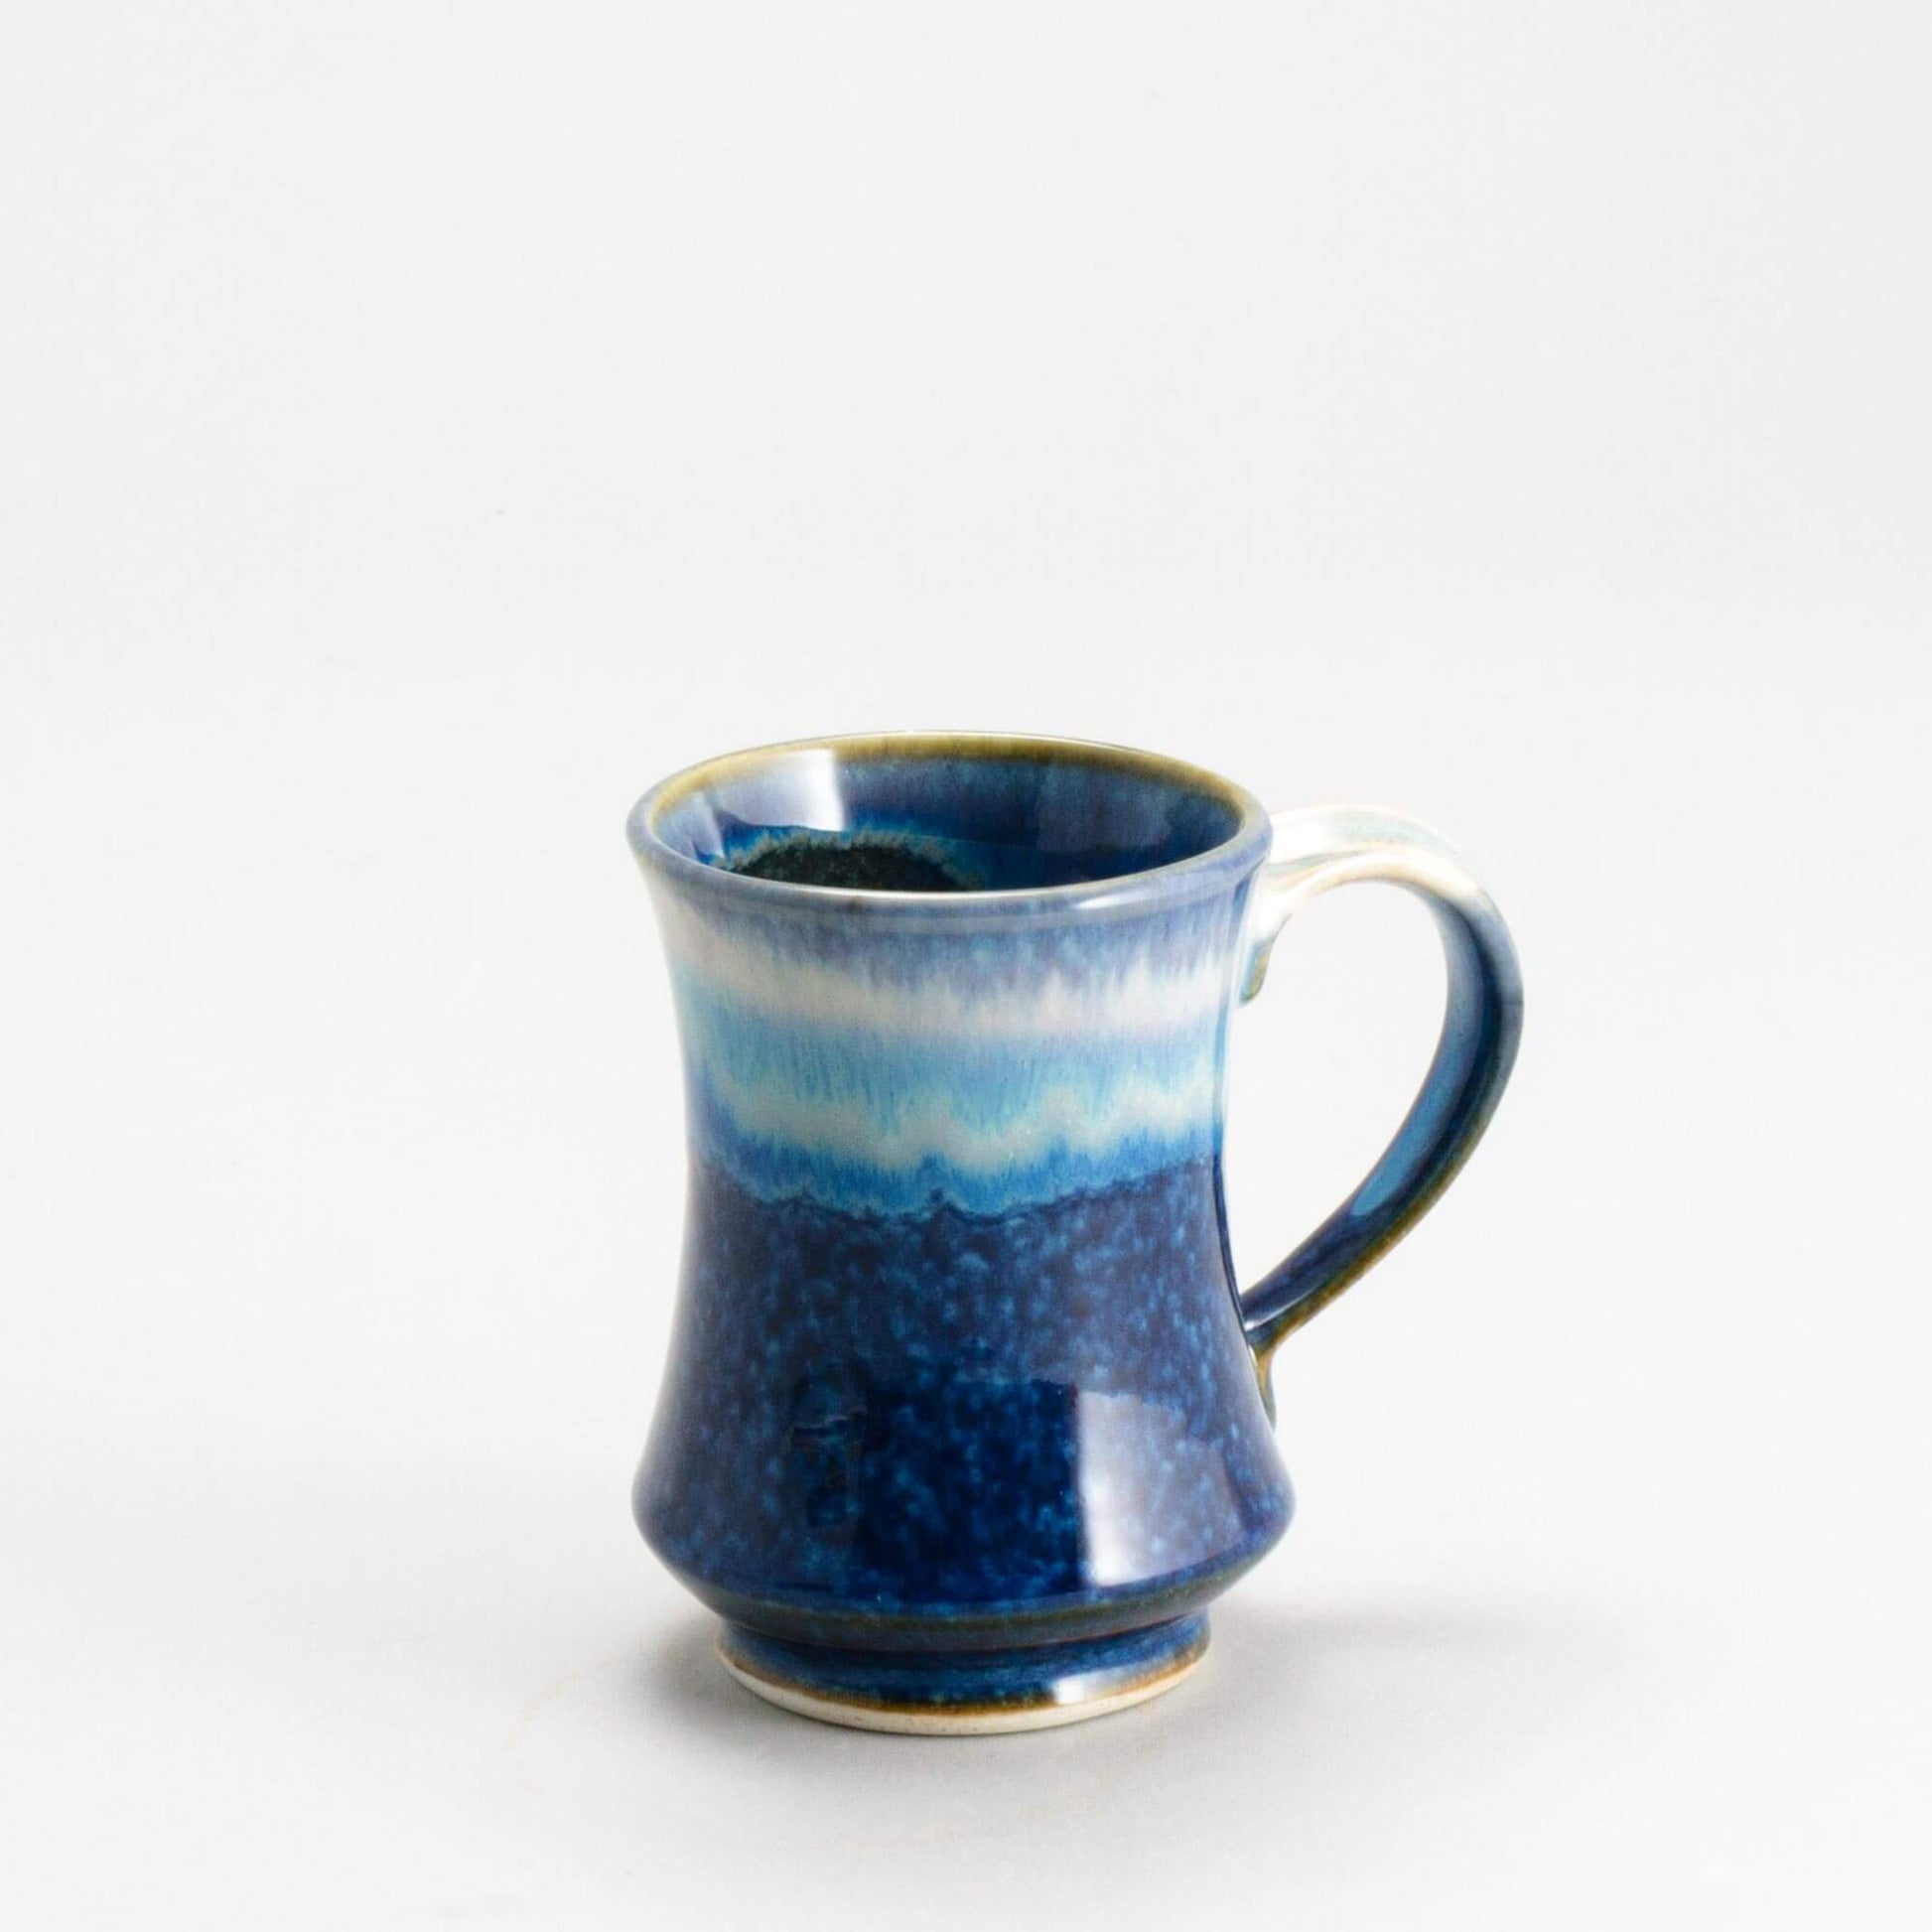 Handmade Pottery Pedestal Mug made by Georgetown Pottery in Maine Cobalt